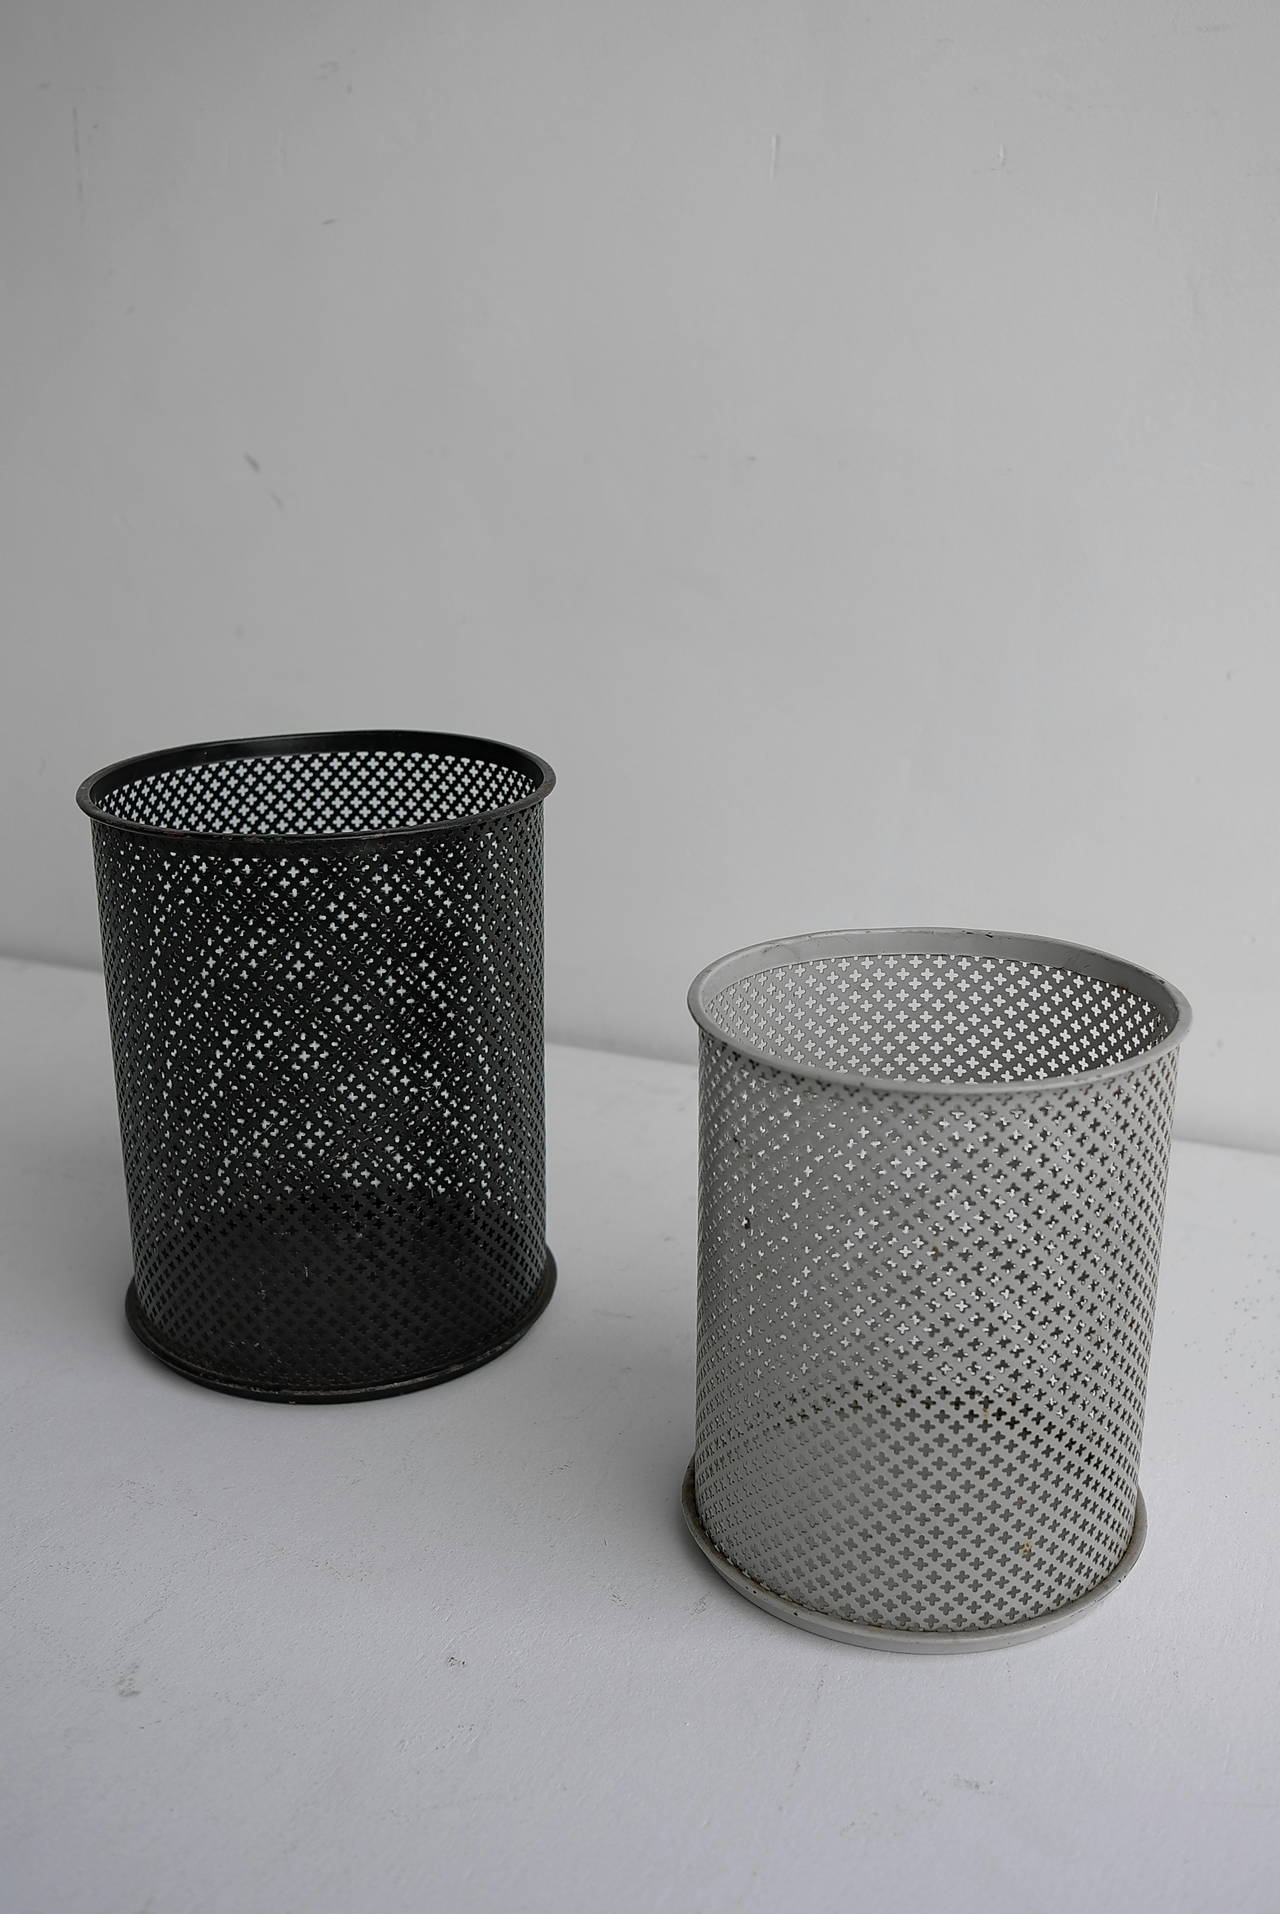 A pair of black and white pervorated metal waste paper baskets.
Designed by Mathieu mategot for Artimeta Soest The Netherlands 1950's.
The black basket is larger than the white.